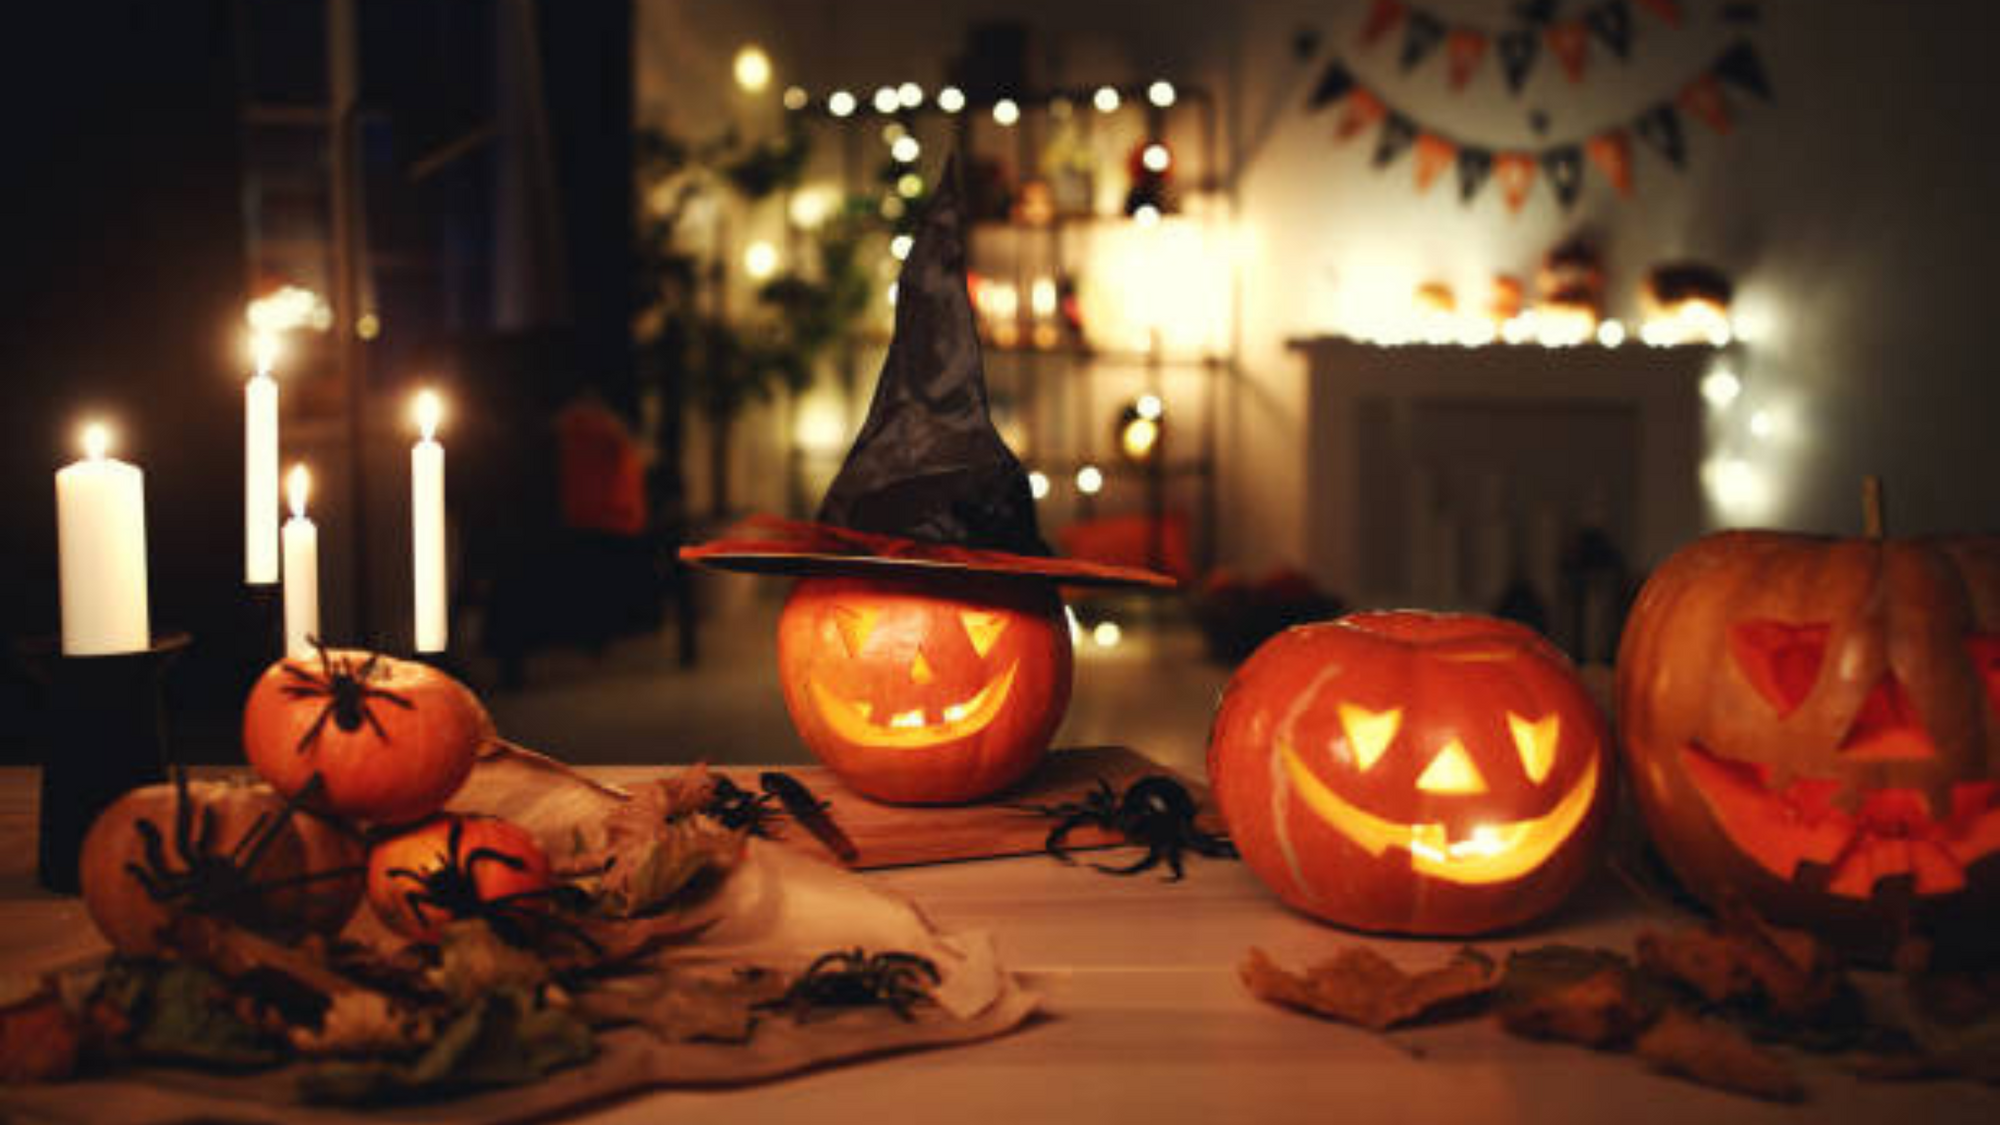 8 Halloween Decor Ideas to Make Your Home Spookily Stylish and Scarily Inviting